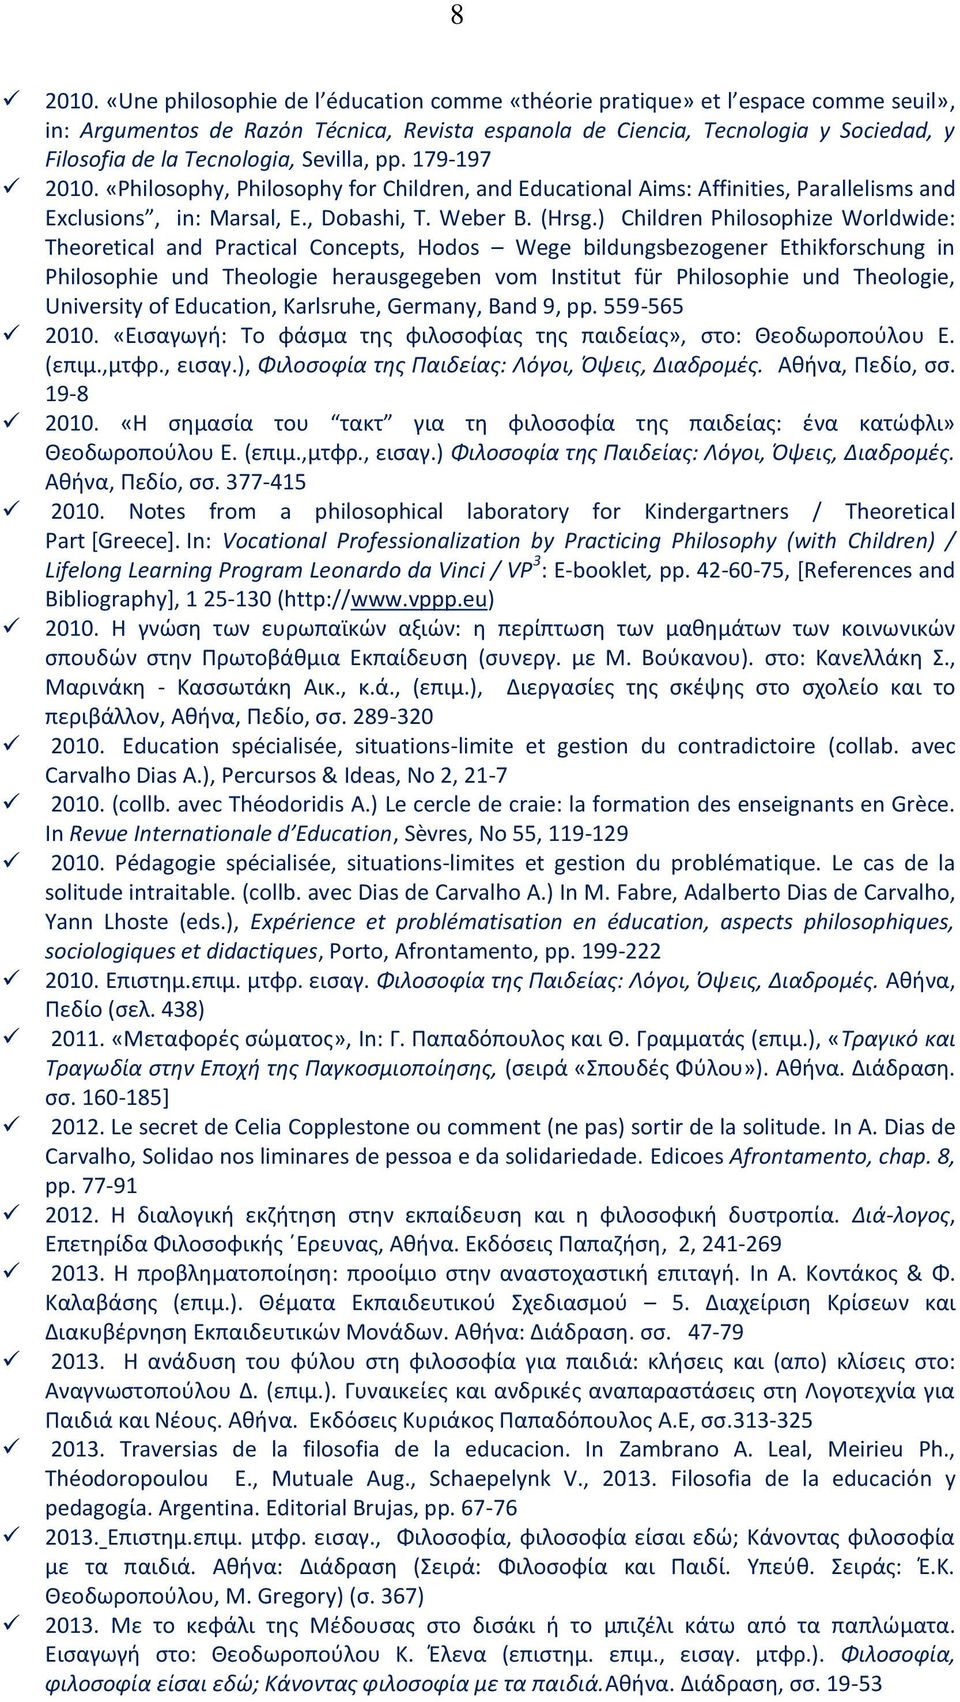 Sevilla, pp. 179-197 2010. «Philosophy, Philosophy for Children, and Educational Aims: Affinities, Parallelisms and Exclusions, in: Marsal, E., Dobashi, T. Weber B. (Hrsg.